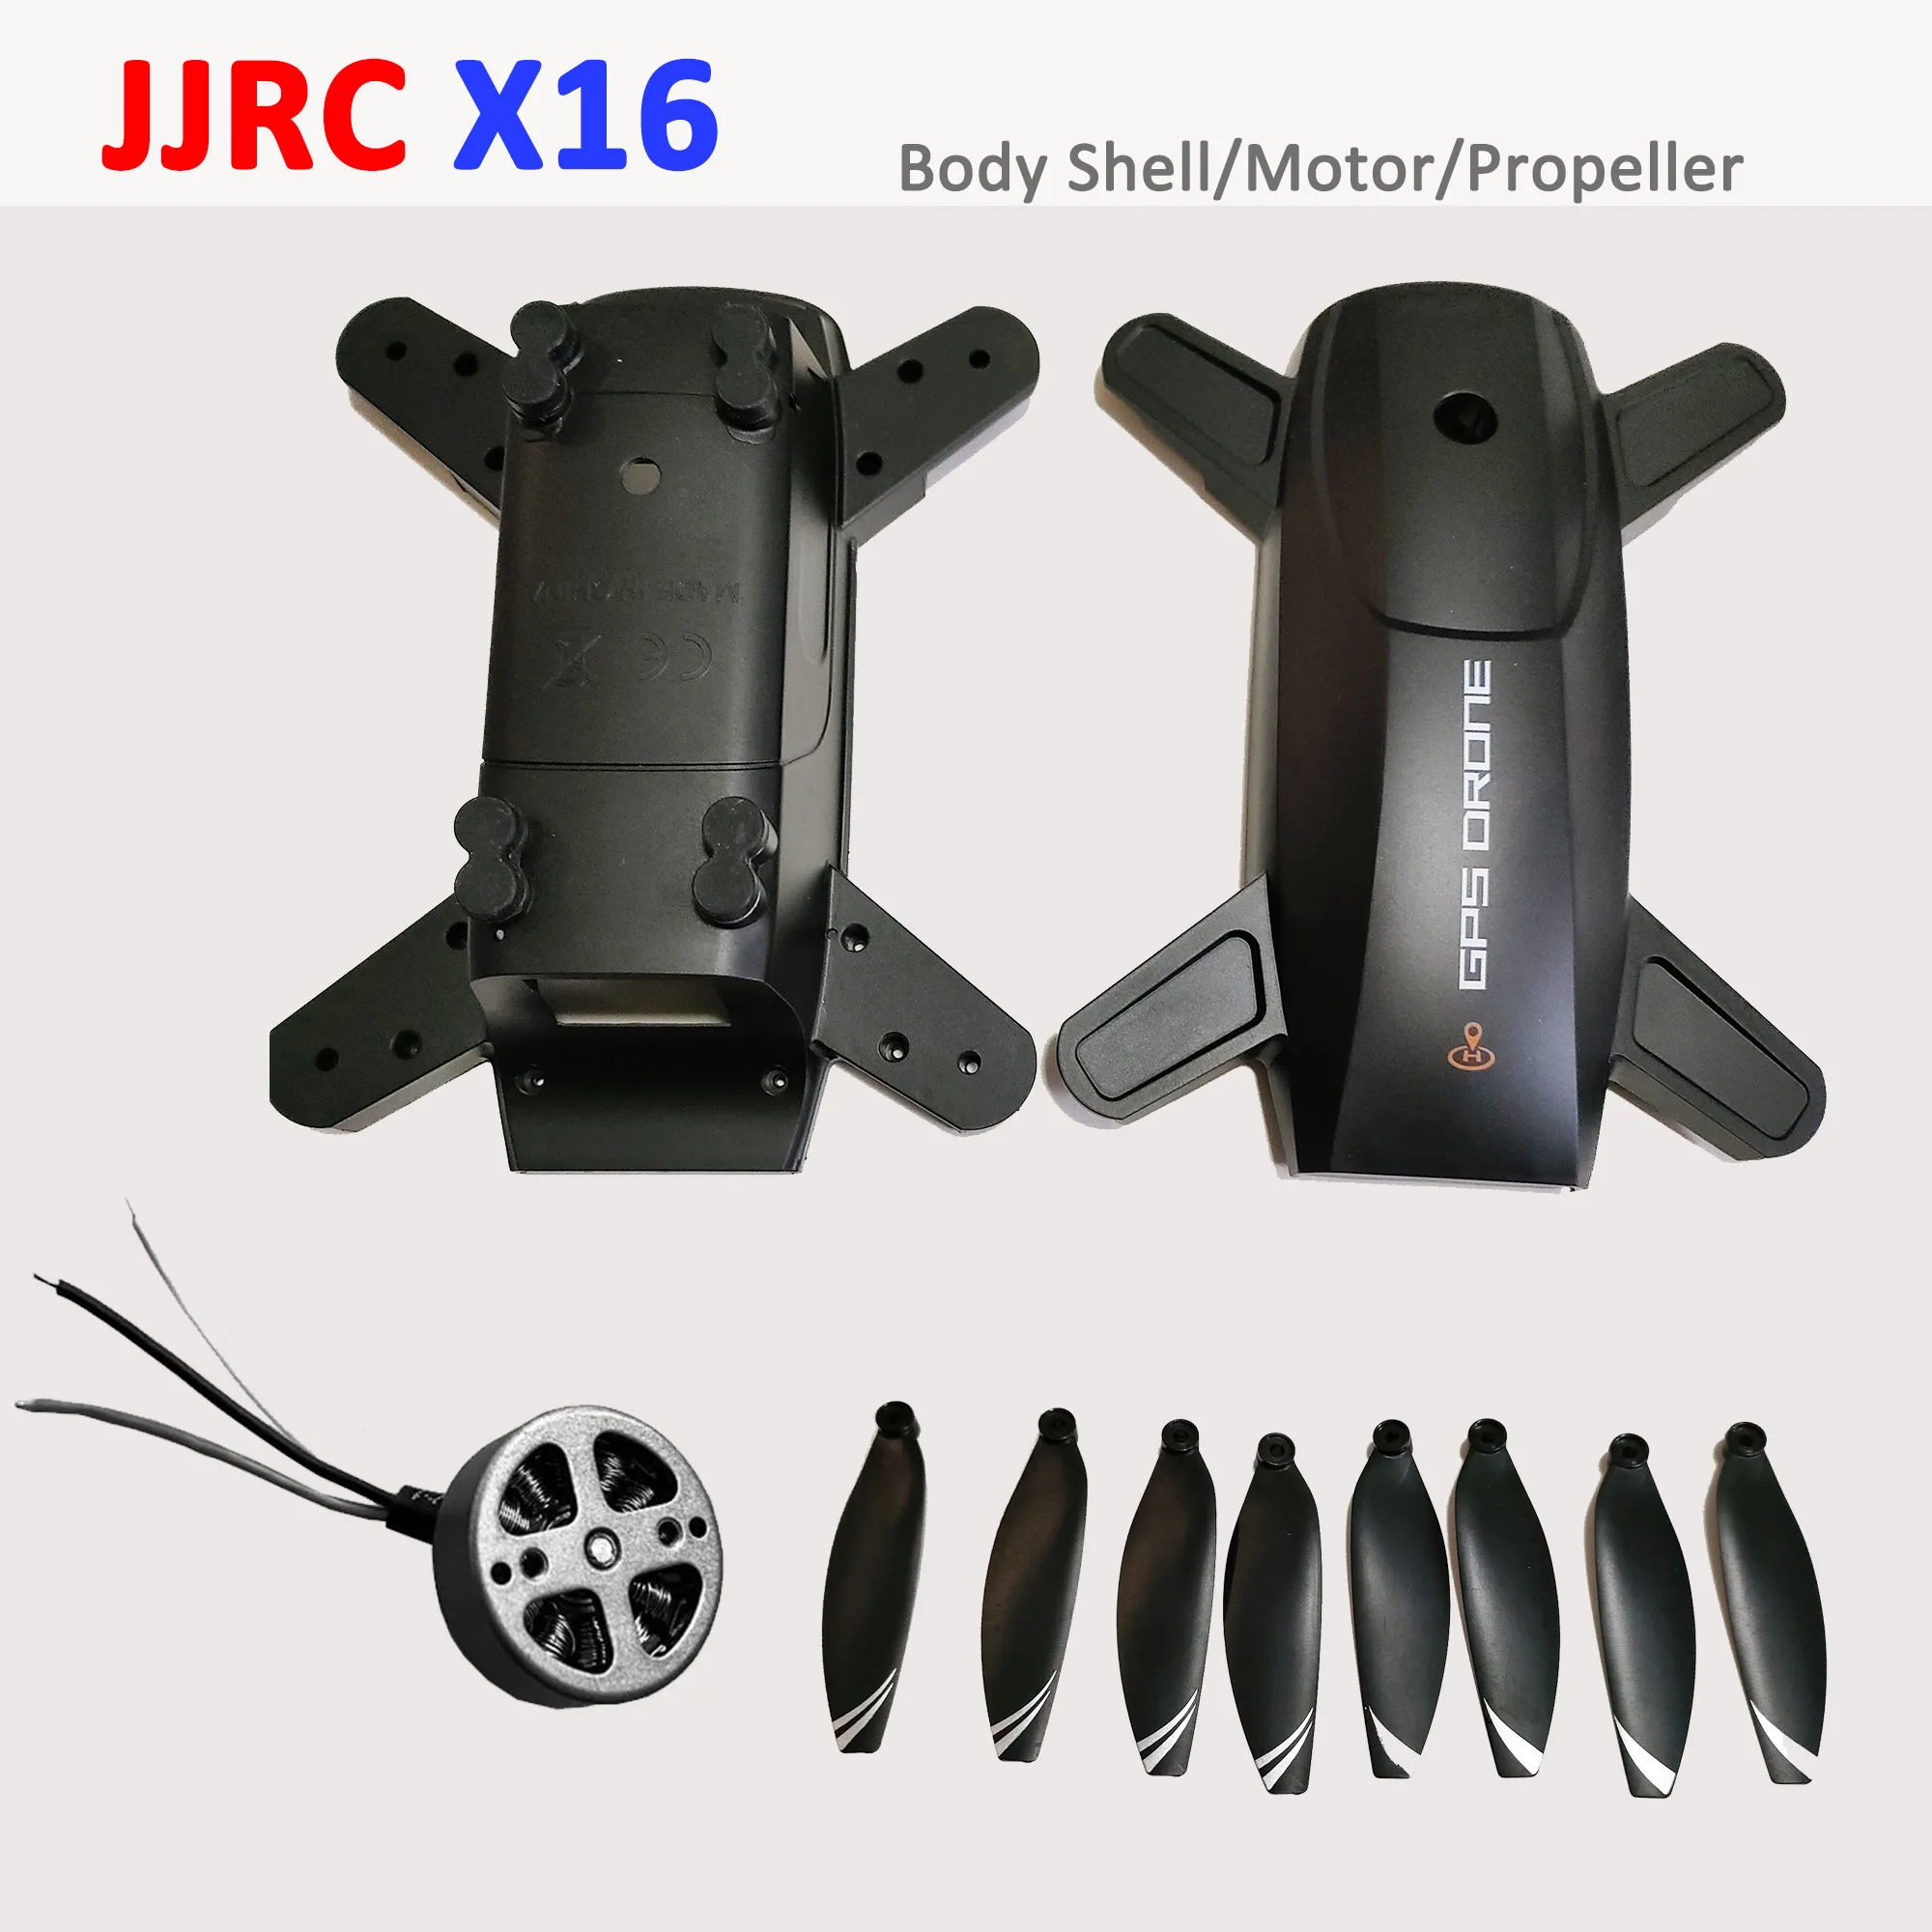 

Original JJRC X16 5G Wifi FPV Drone Up Down Shell Body Cover Arm's Engine Brushless Motor Propeller Props Blade Spare Part